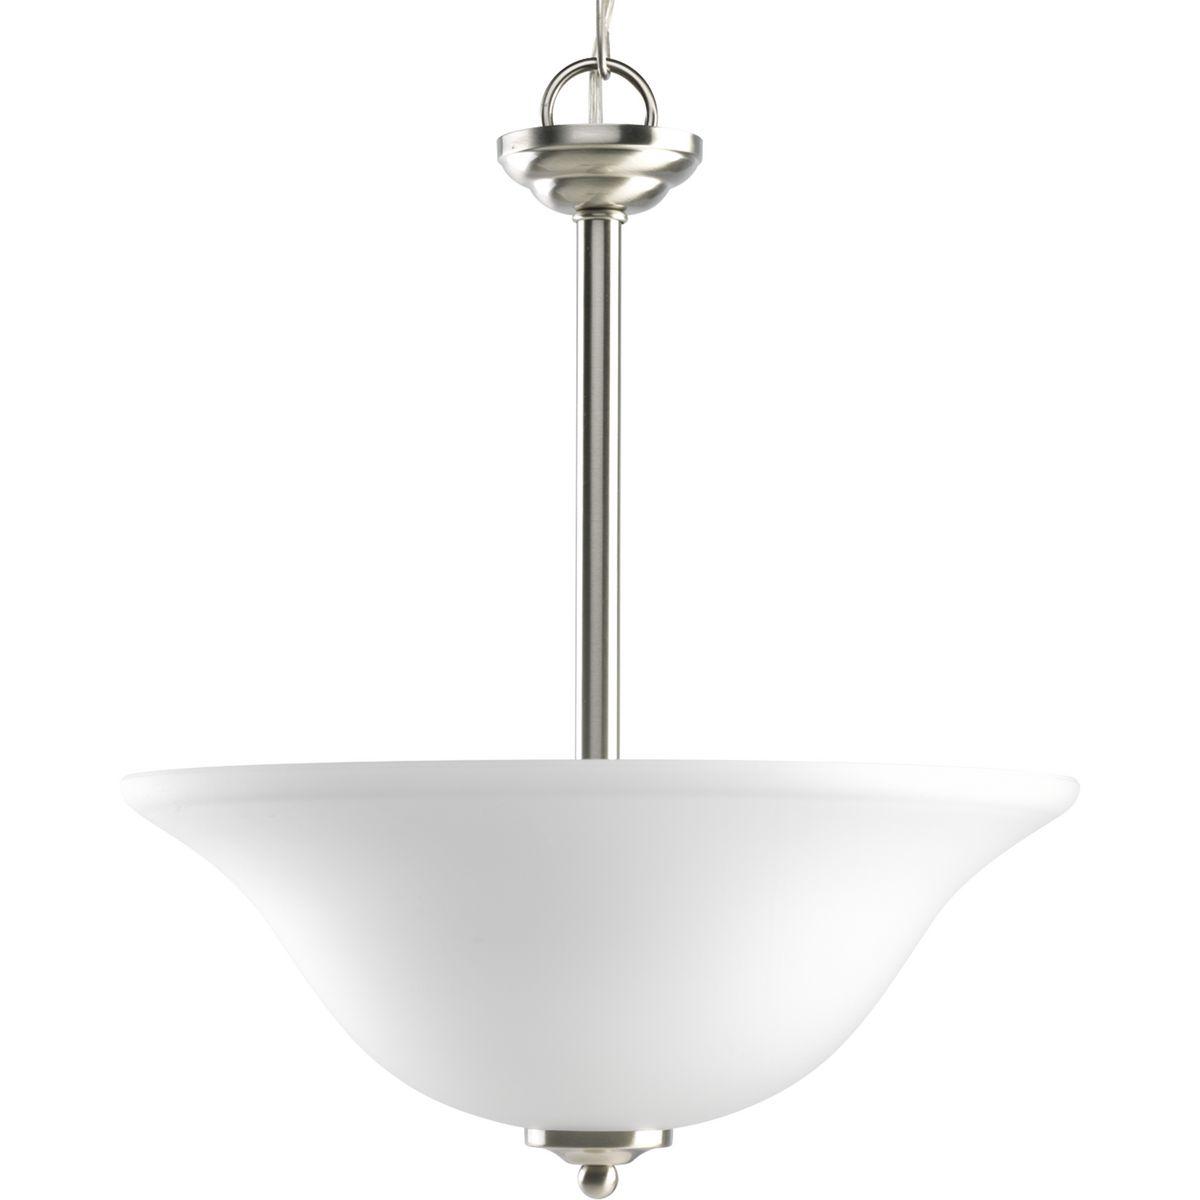 Hubbell HS41007-09 Featuring delicate scrolled metalwork and soft details, this casual two-light inverted pendant is perfect for many interiors. Slightly tapered etched glass shade are completed by a Brushed Nickel finish.  ; Brushed Nickel finish ; Etched glass shade ; Sof